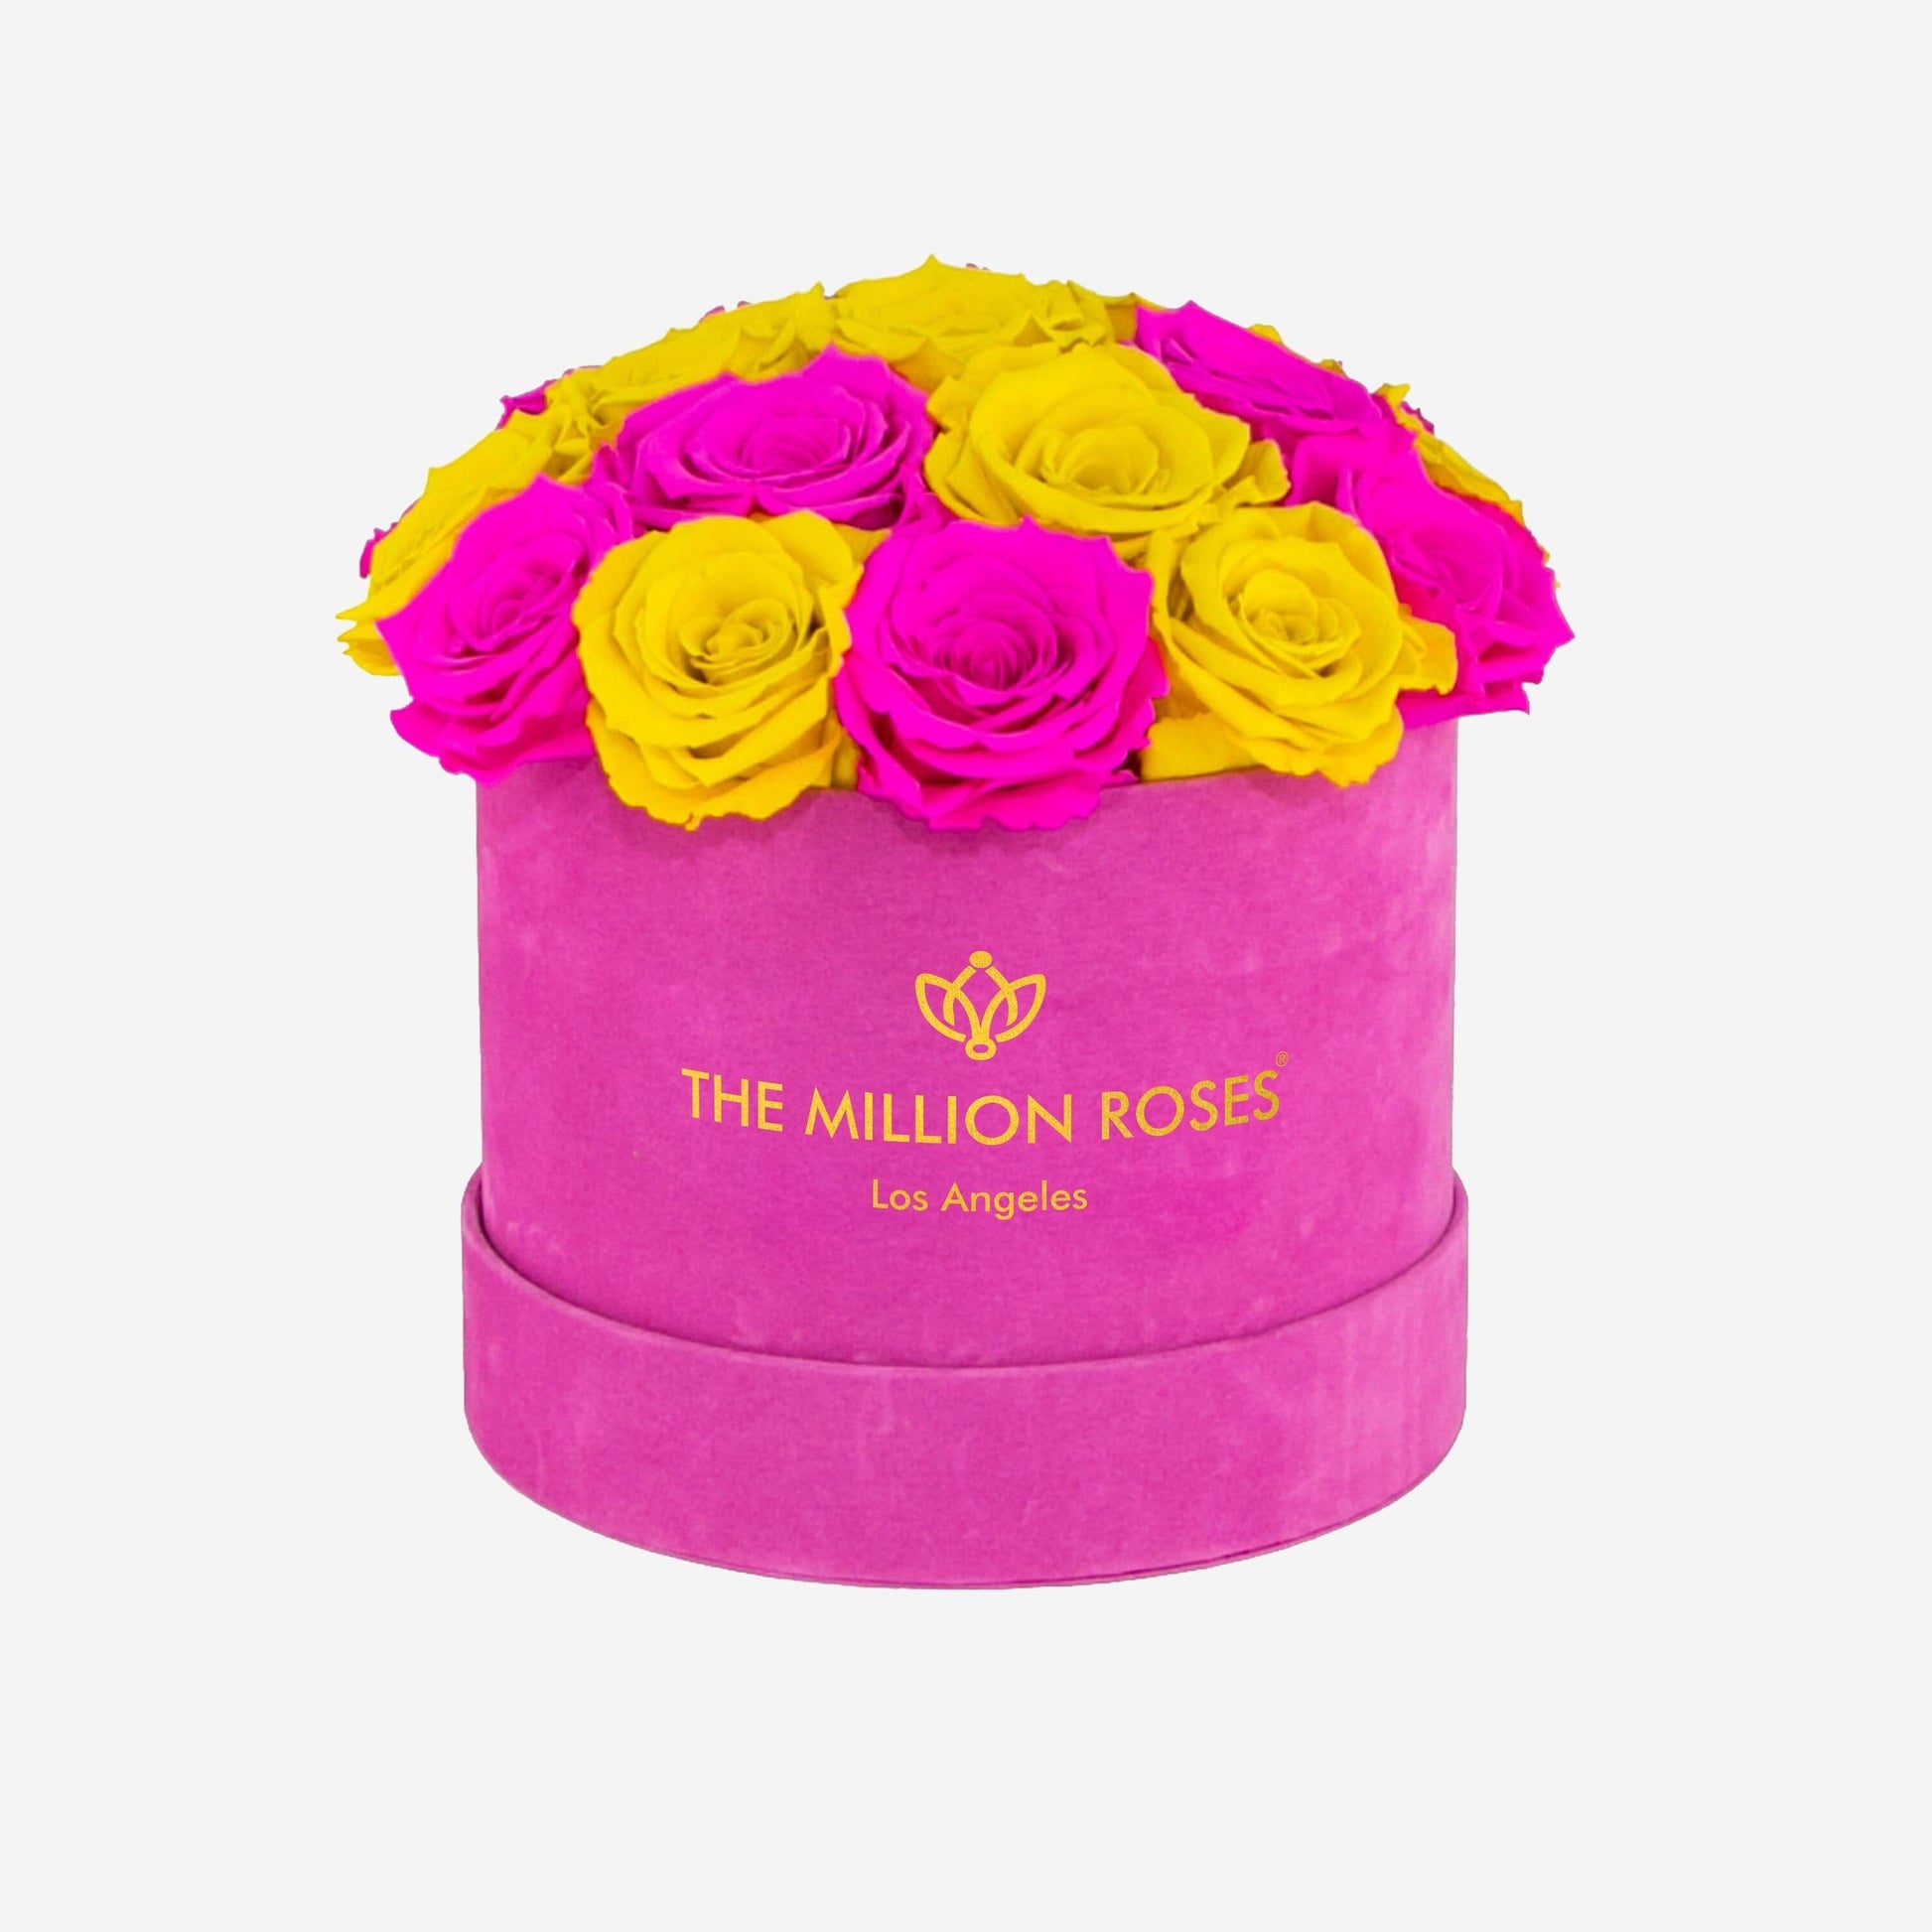 Classic Hot Pink Suede Dome Box | Neon Pink Roses | Various Combinations - The Million Roses